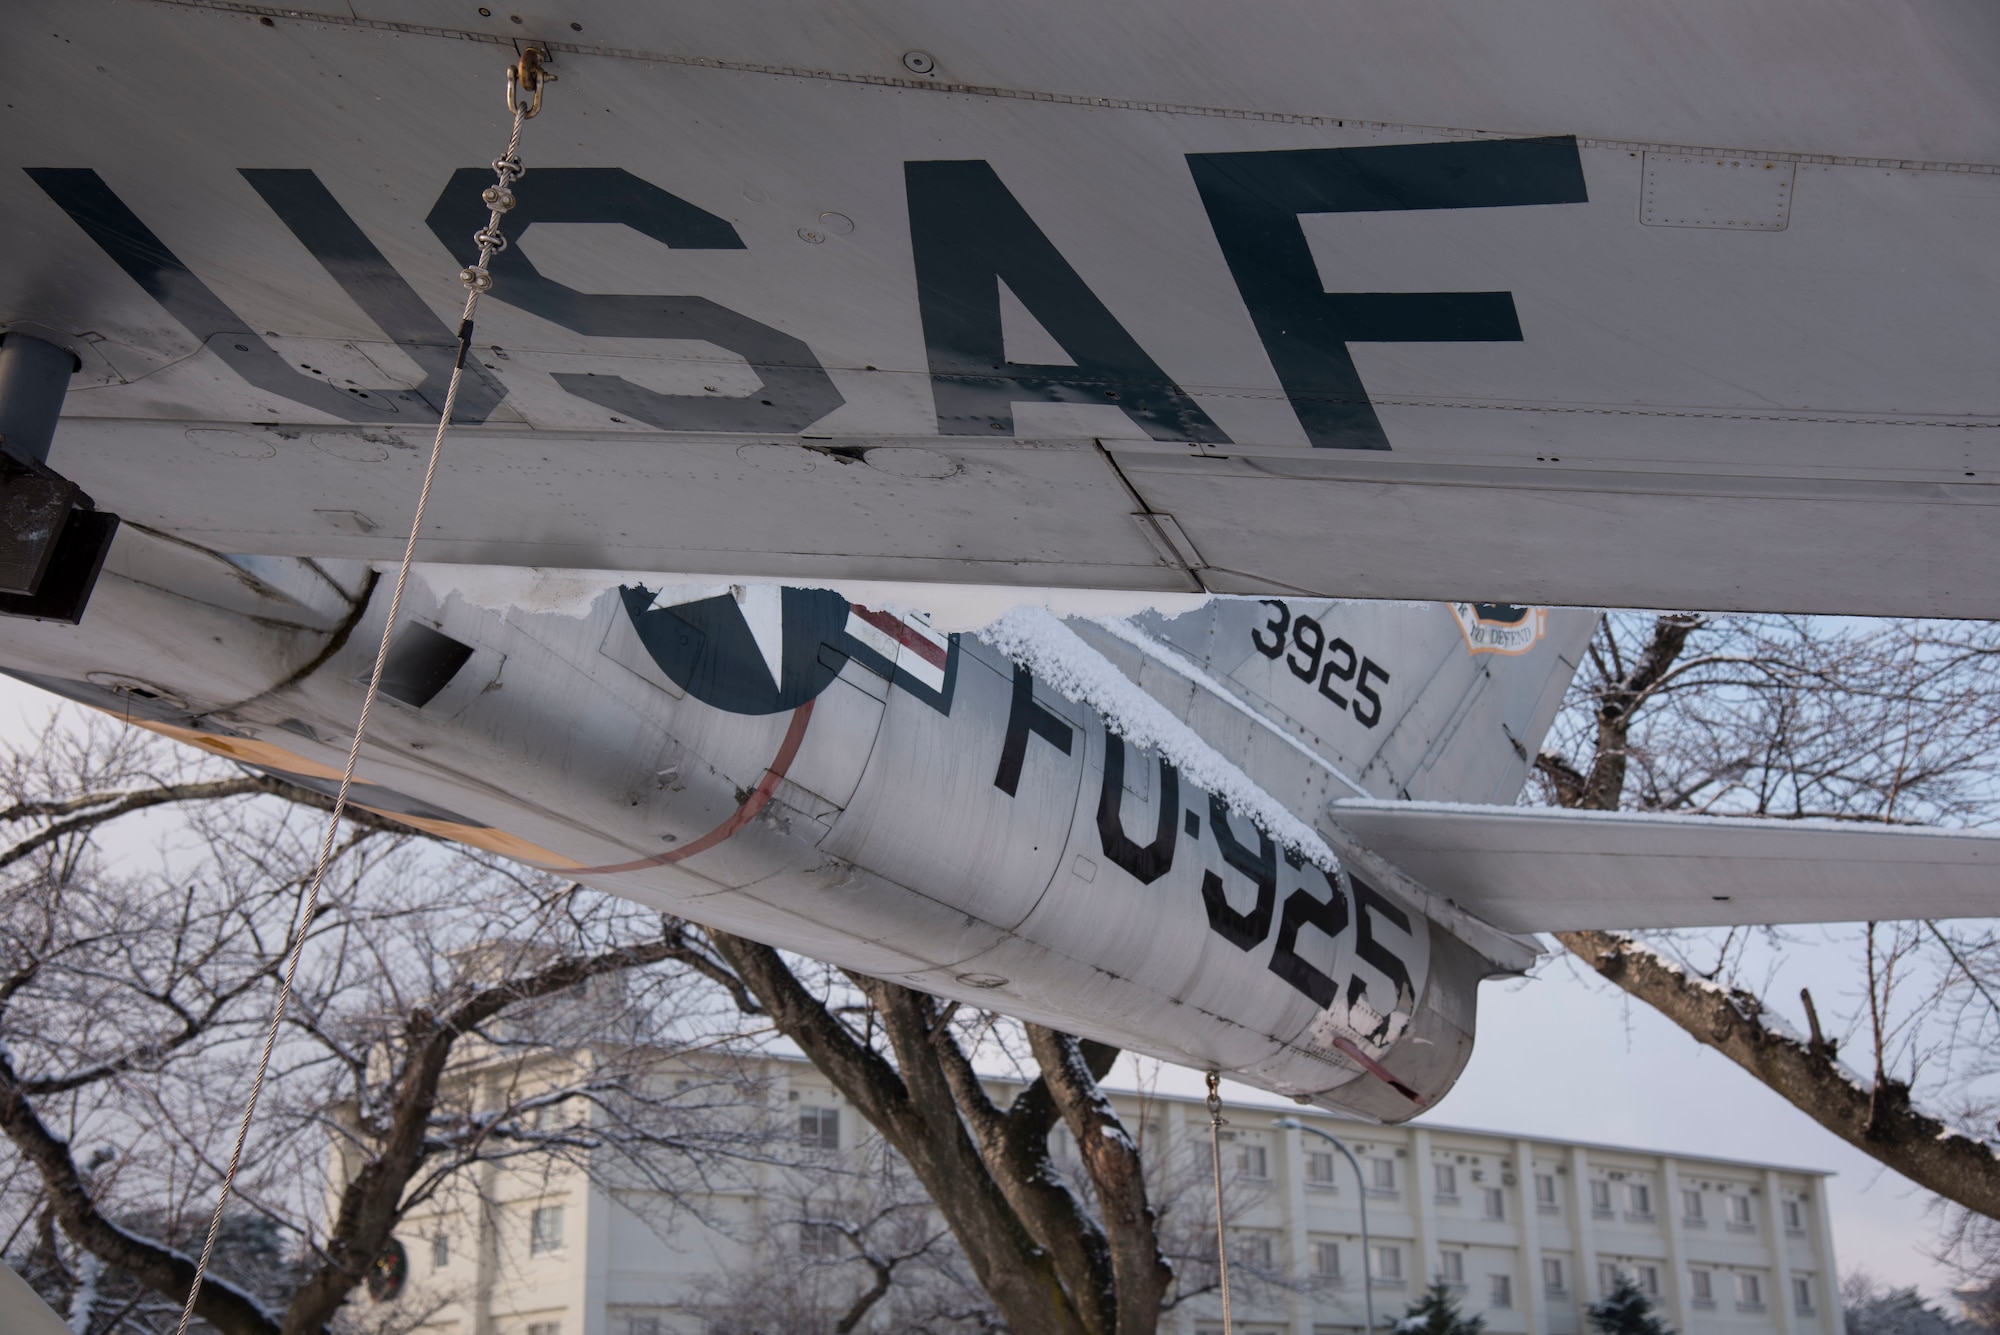 An F-86F Sabre displays its tail number and a "USAF" marking in Risner Circle at Misawa Air Base, Japan, Dec. 18, 2018. The aircraft could climb 6,000 ft per minute and reached a maximum speed of 690 mph. The model began production in 1952, and both U.S. Air Force and Japan Air Self-Defense Force units at Misawa AB utilized the aircraft until 1979, downing 818 MIGs during the Korean War. (U.S. Air Force photo)